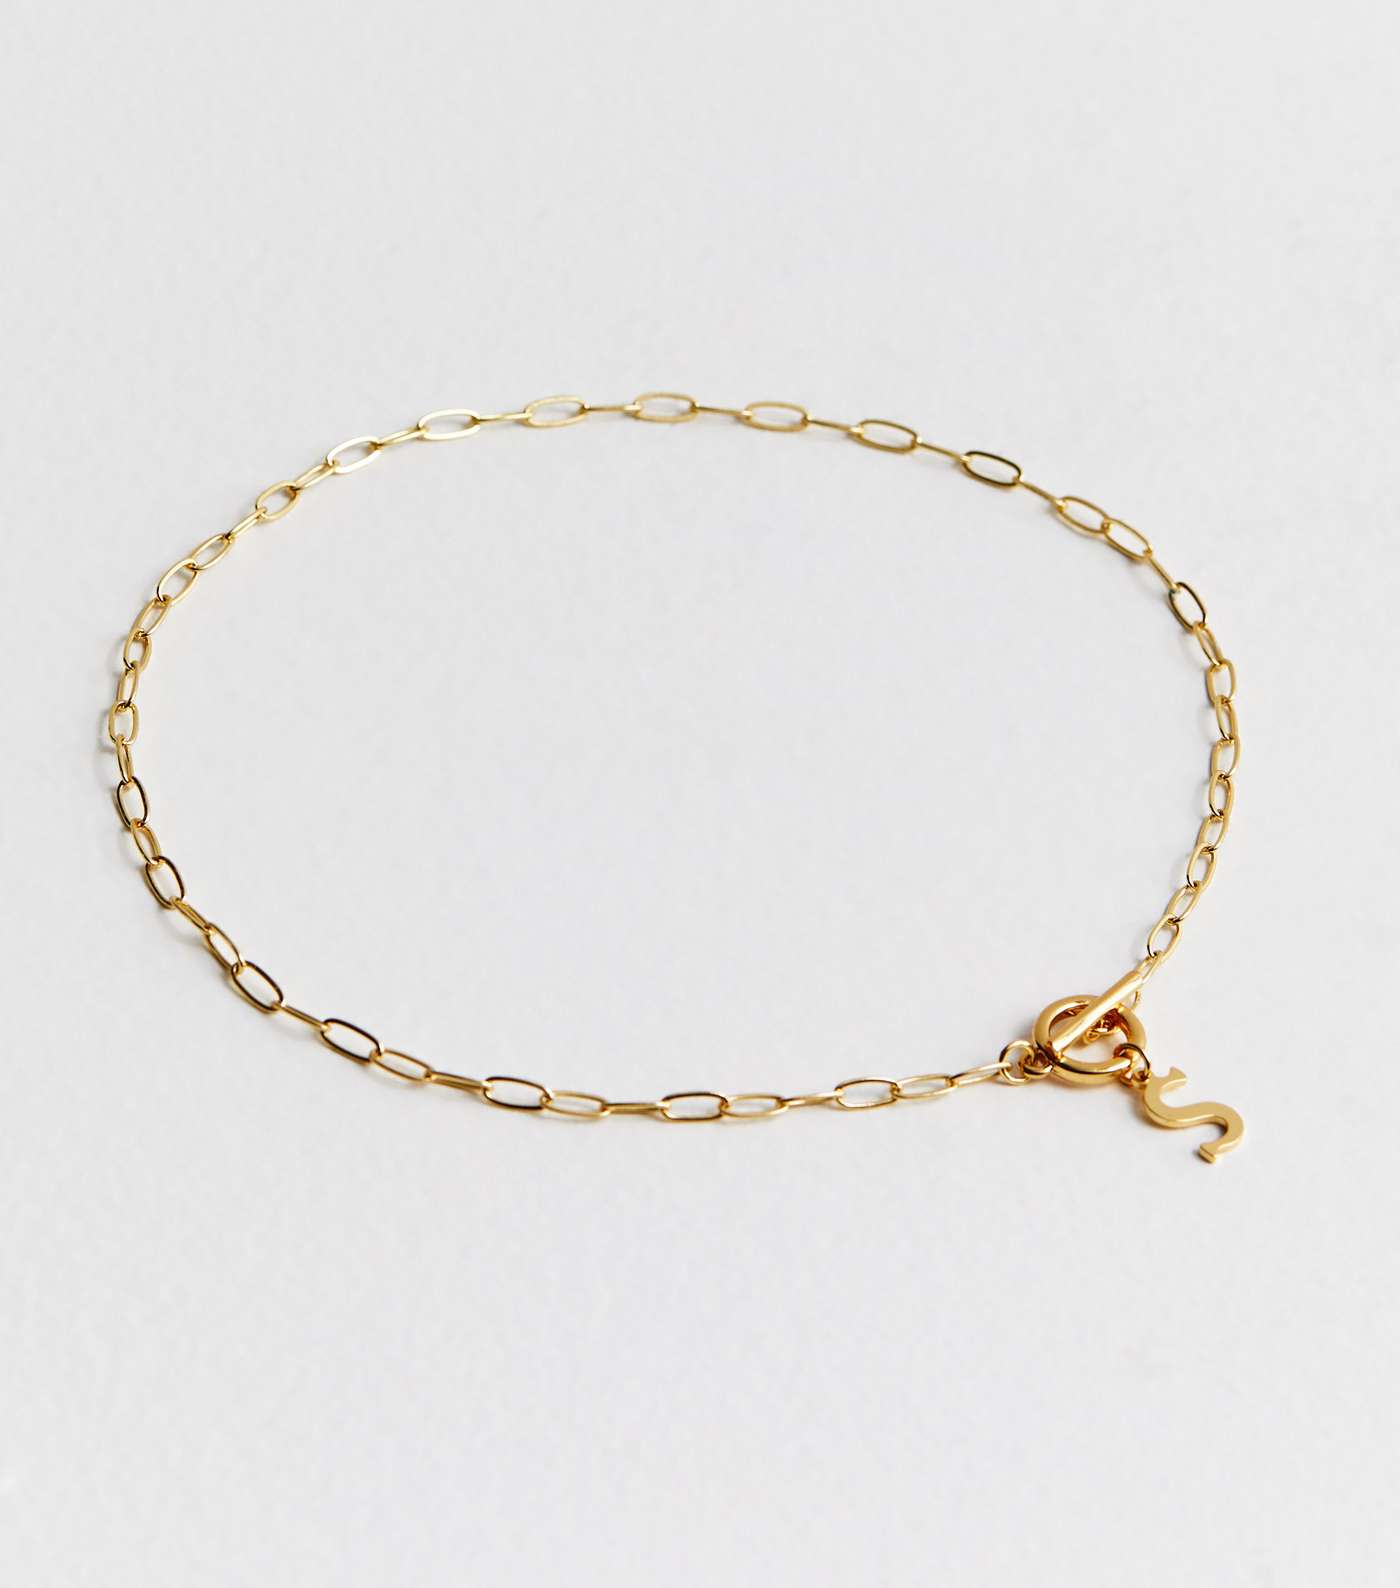 Real Gold Plate S Initial Chain Link Necklace Image 3